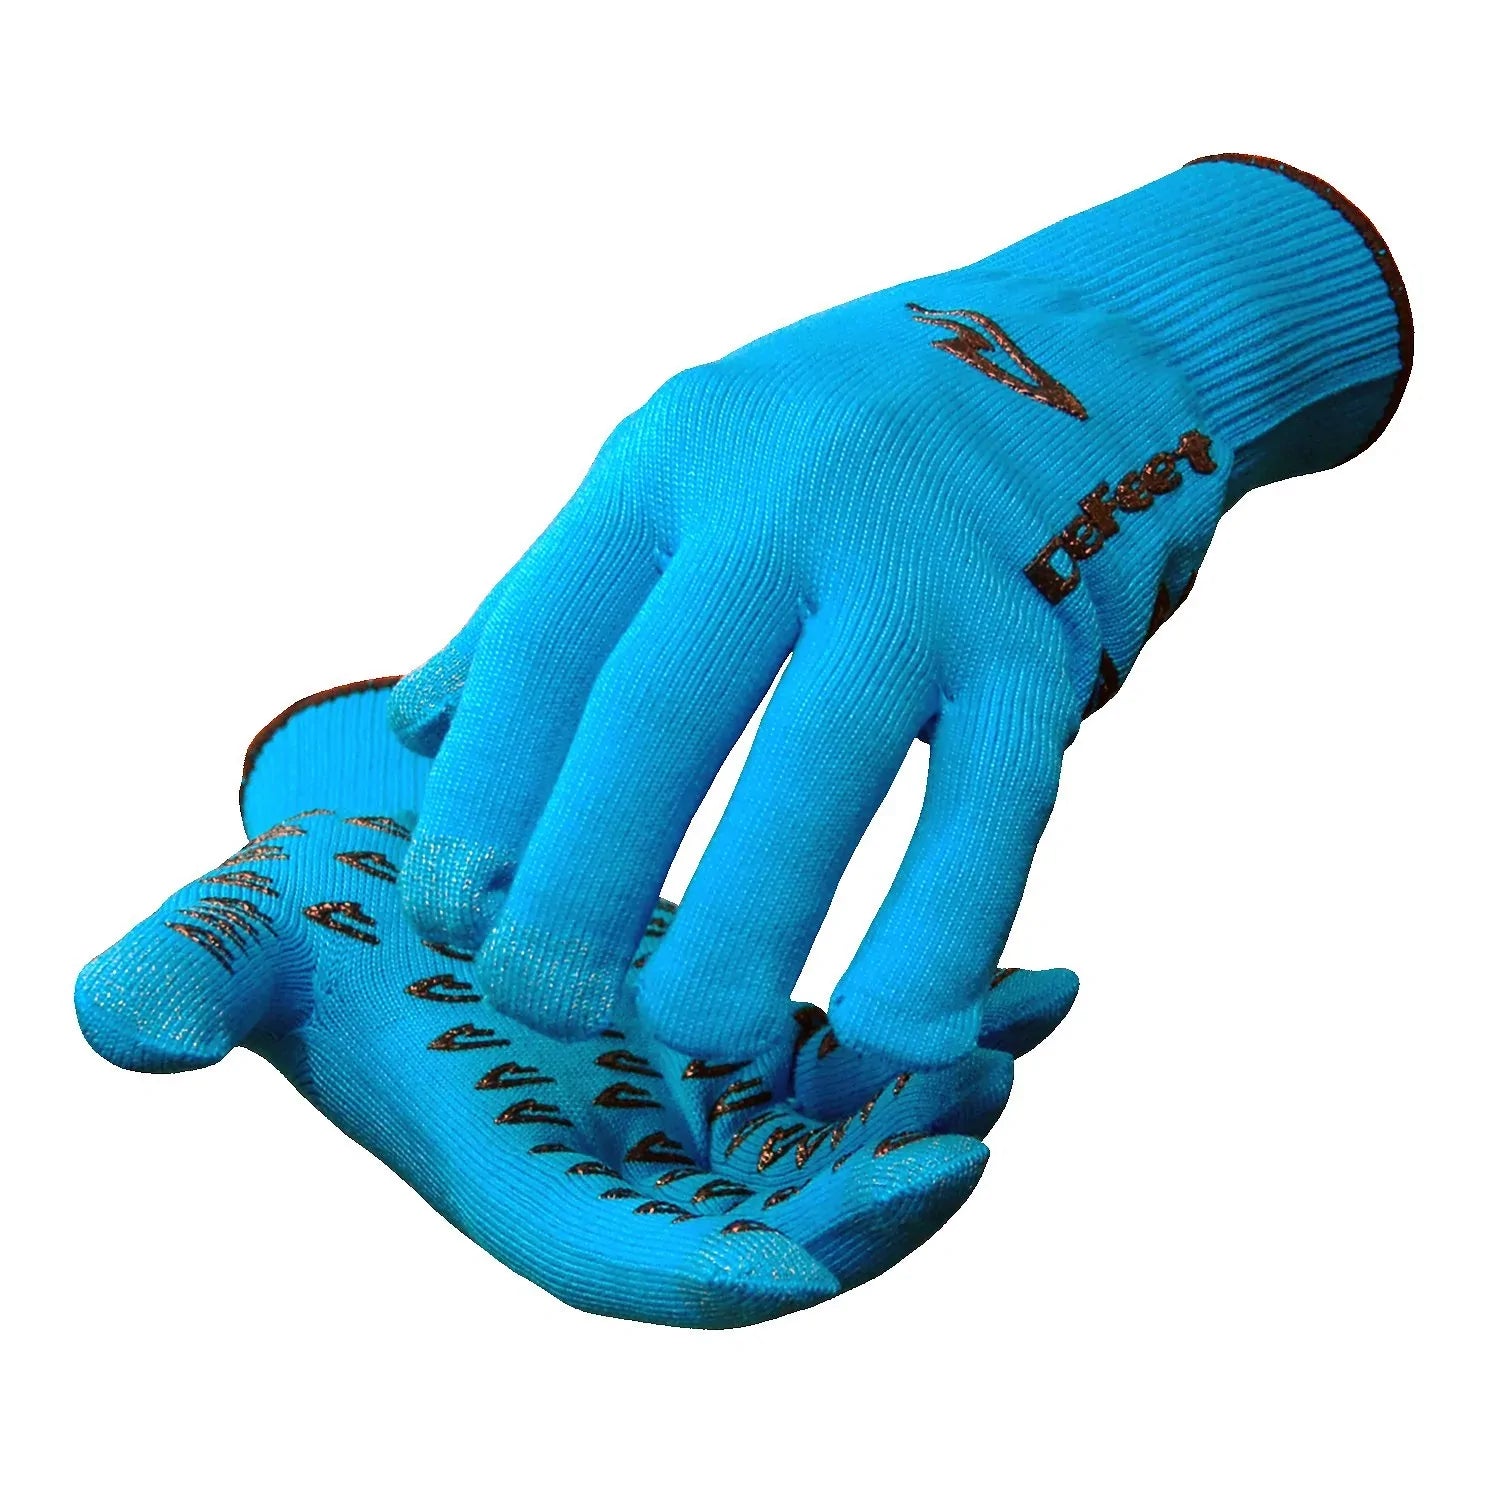 blue knitted cycling gloves with black D-logo grippies on palm